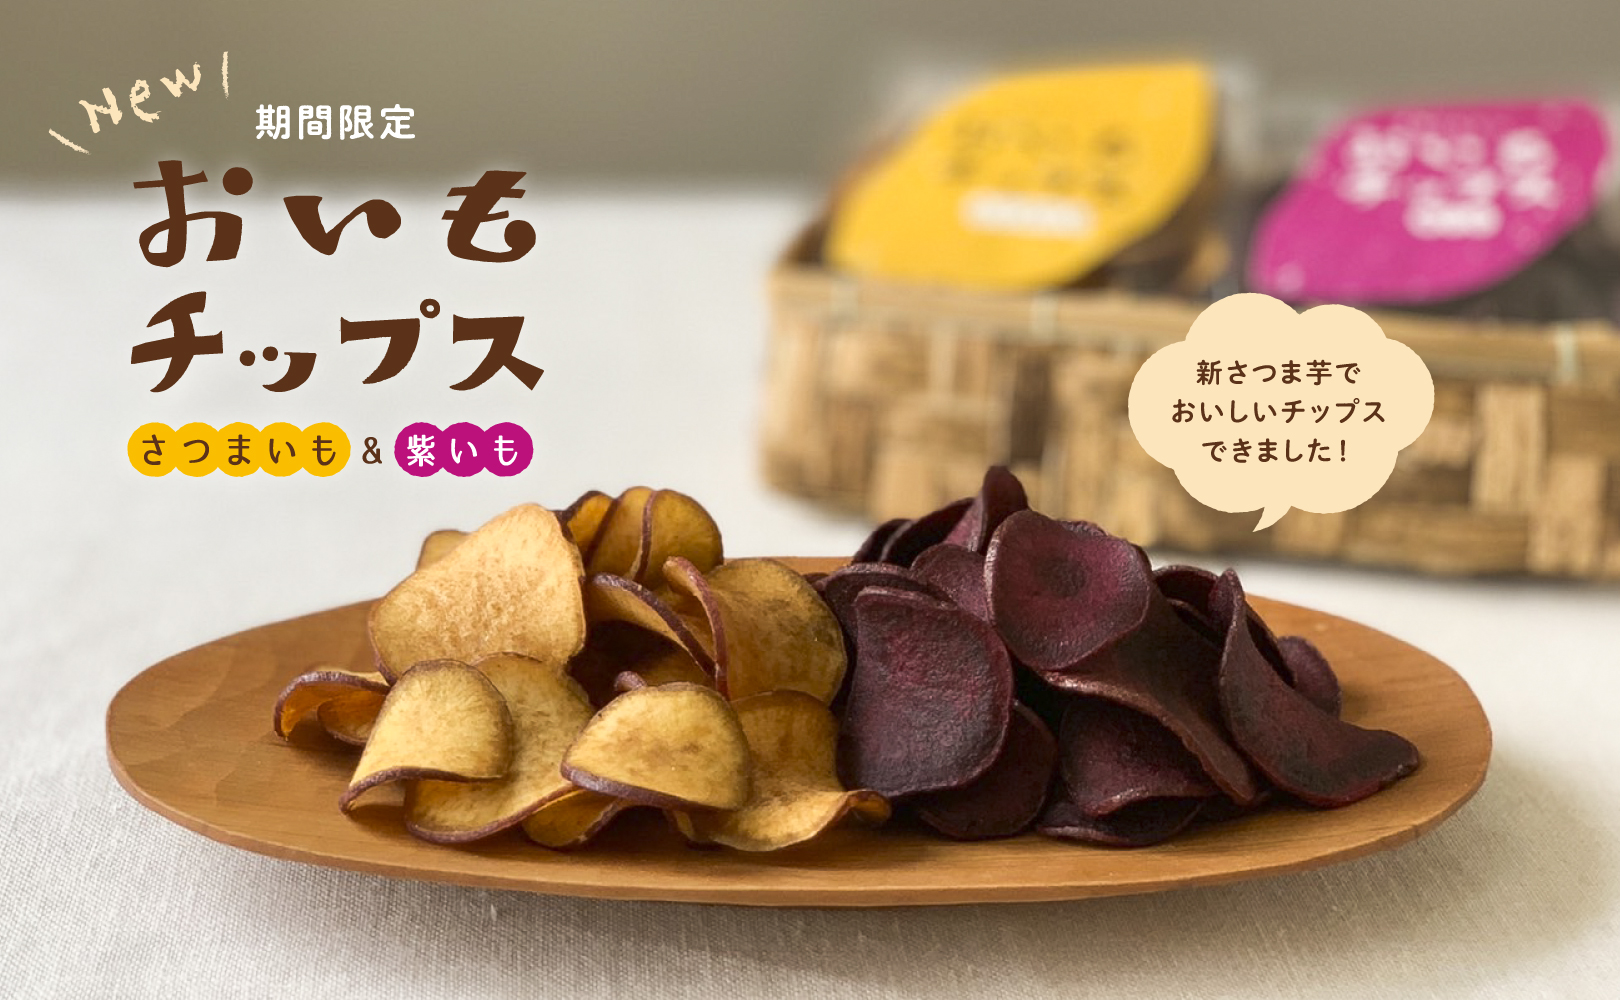 Oimo chips